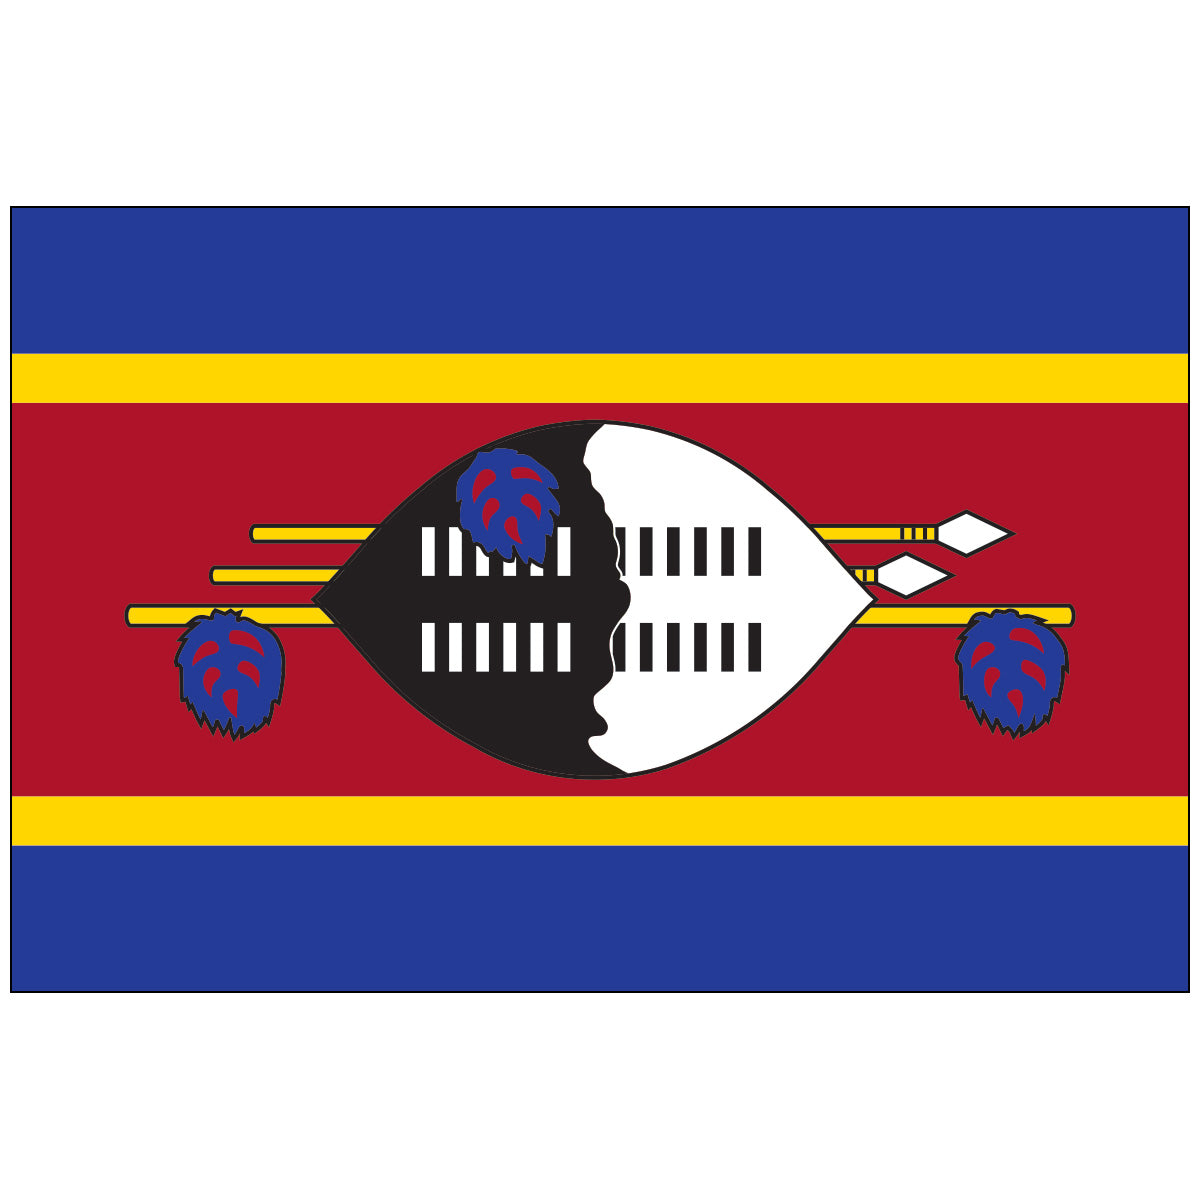 Swaziland-Flag-National-Flags-International-Flags-Country Flags-Flagsource Southeast-Woodstock-GA